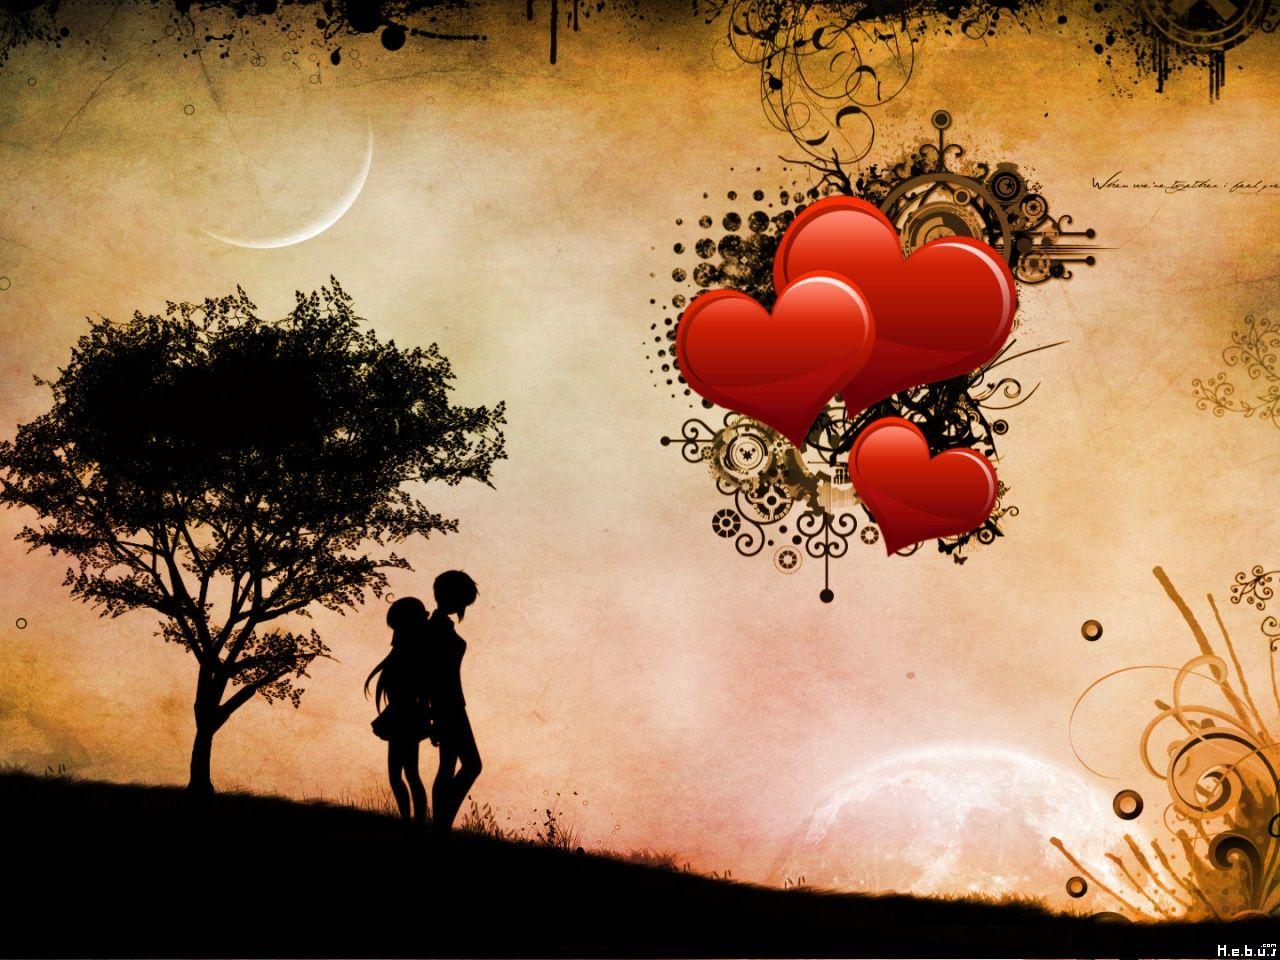 LOVE COUPLE WALLPAPERS FREE DOWNLOAD Diwali Image